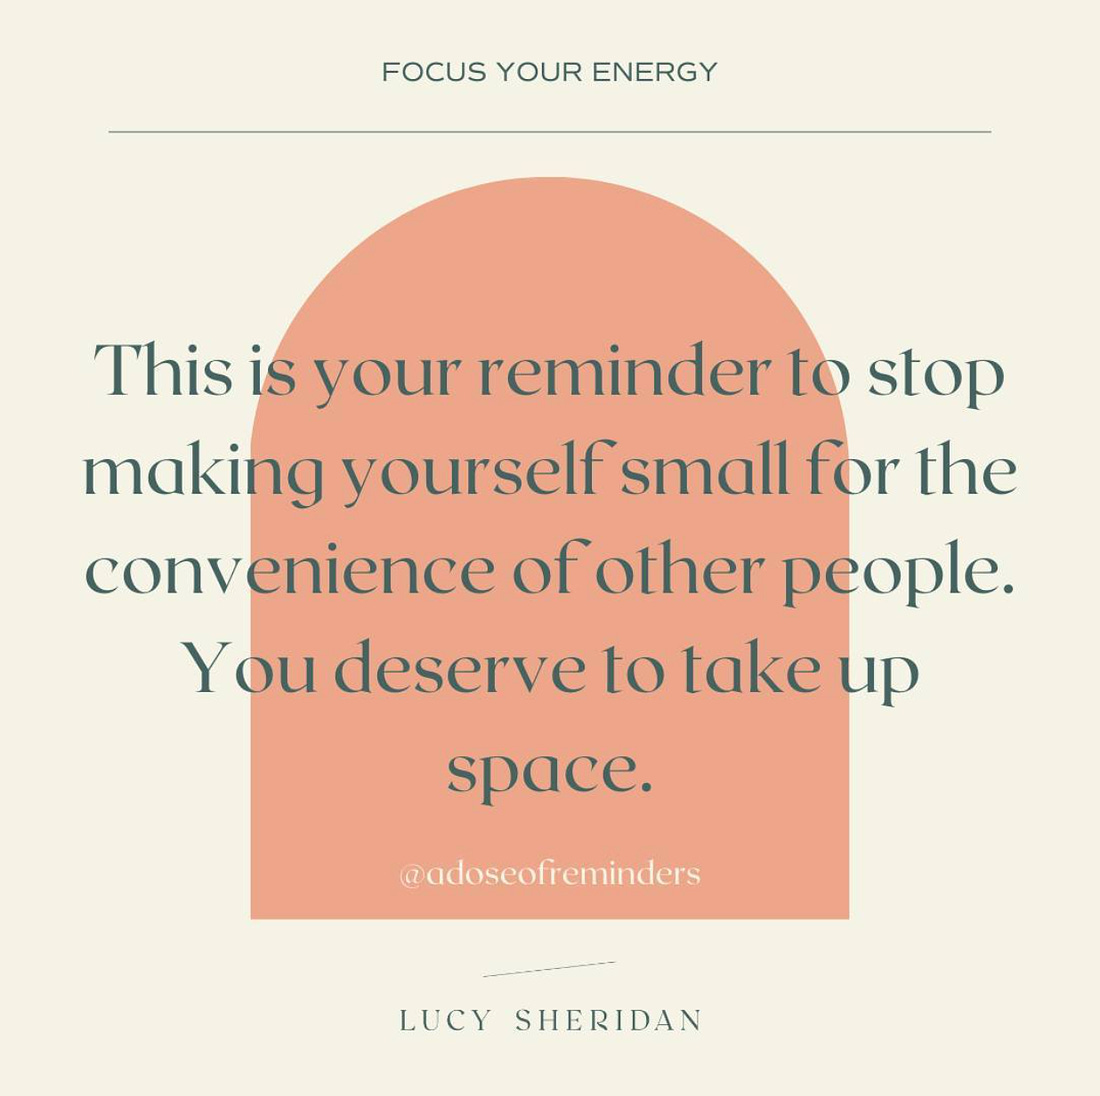 A quote that reads, "This is your reminder to stop making yourself small for the convenience of other people. You deserve to take up space." - Lucy Sheridan